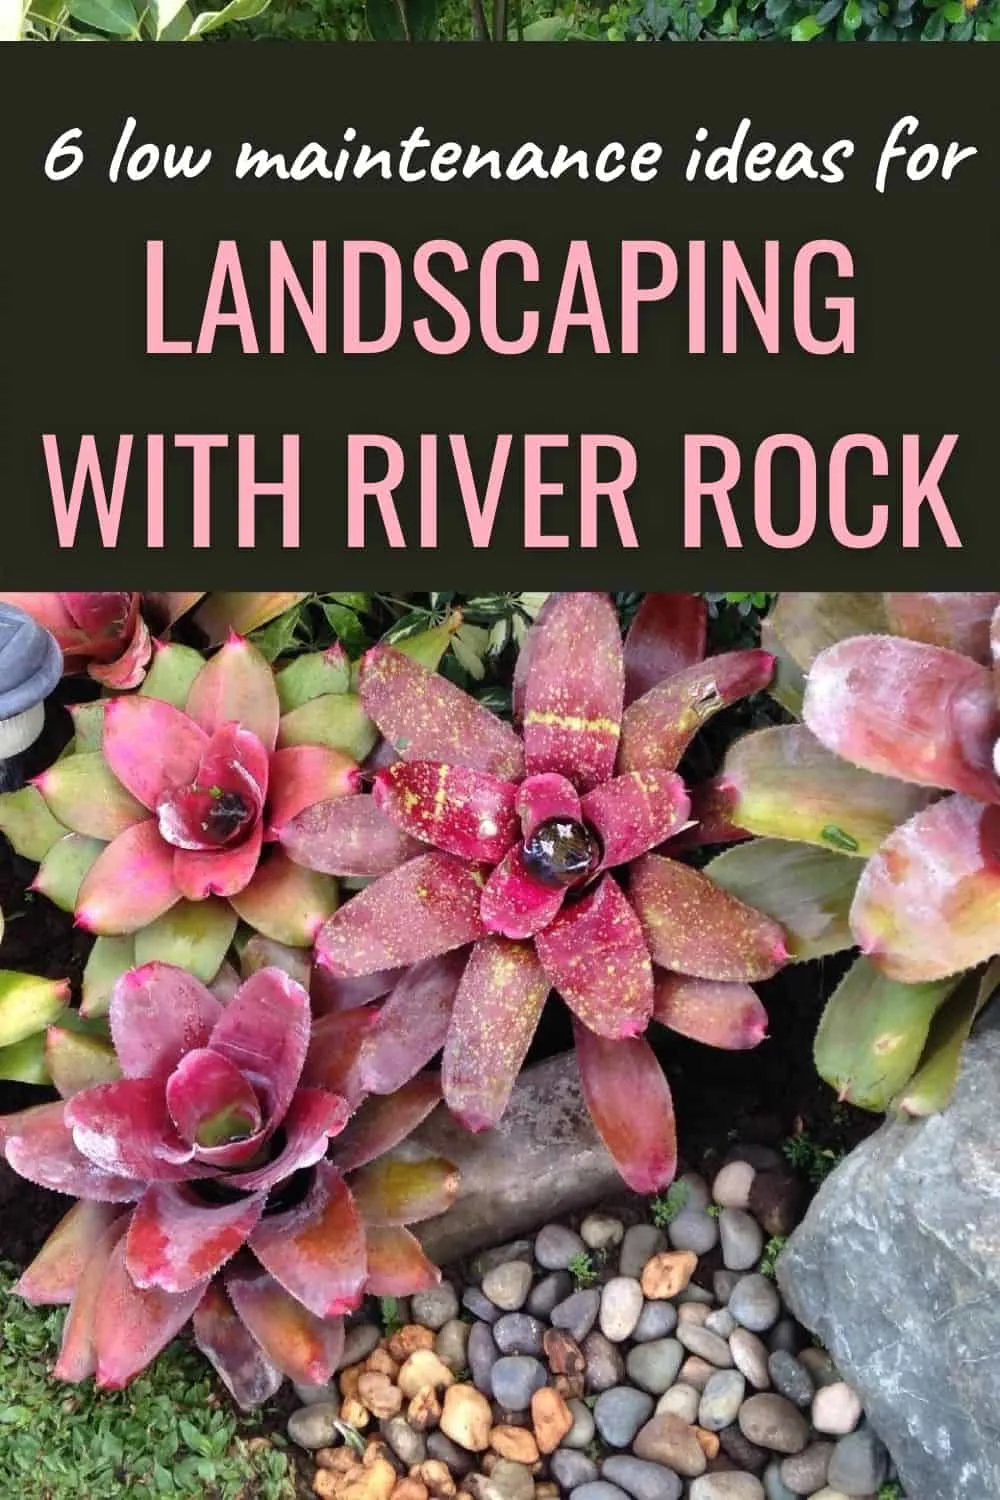 6 low maintenance ideas for landscaping with river rock